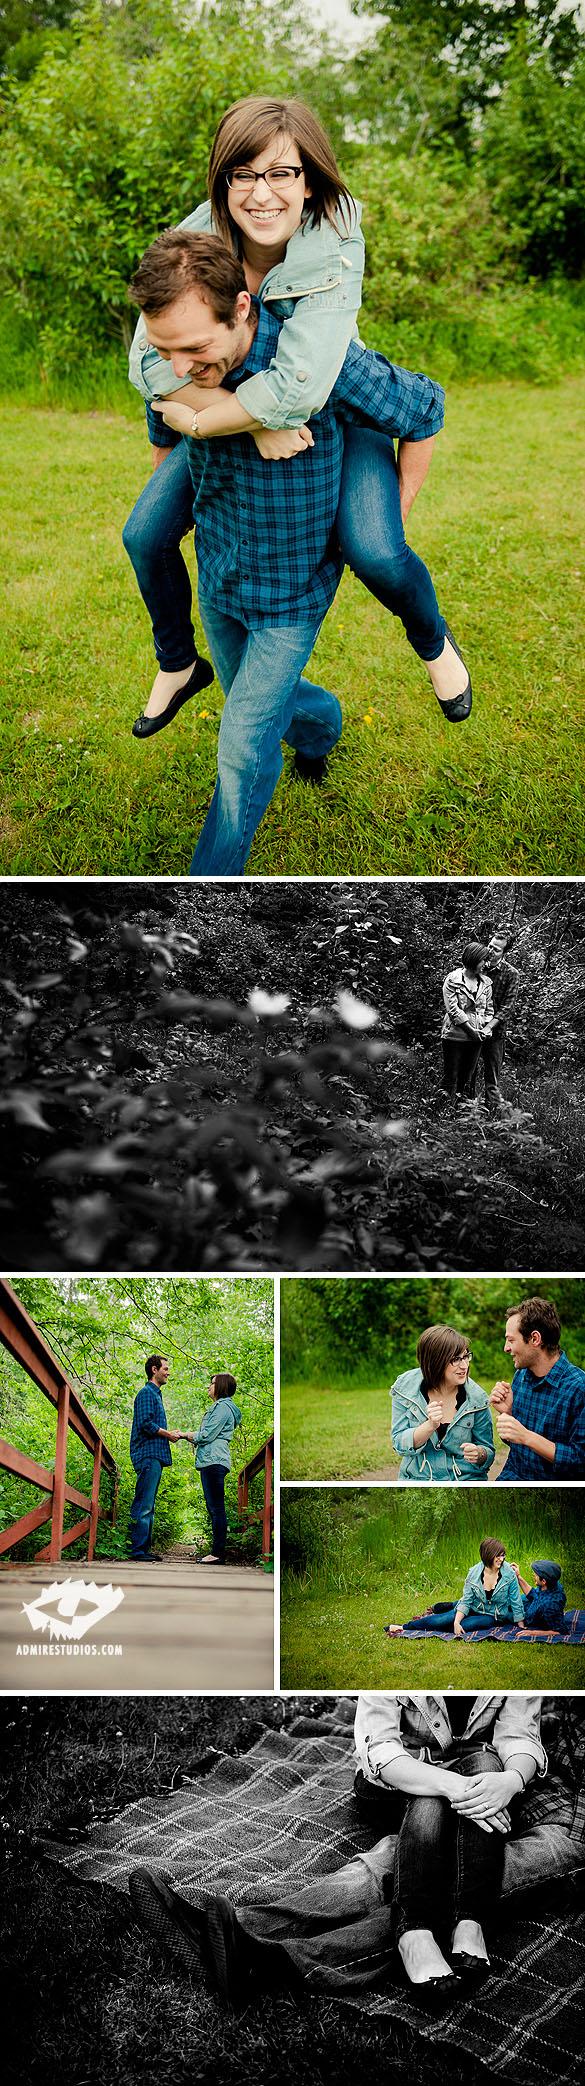 Fun engagement photography